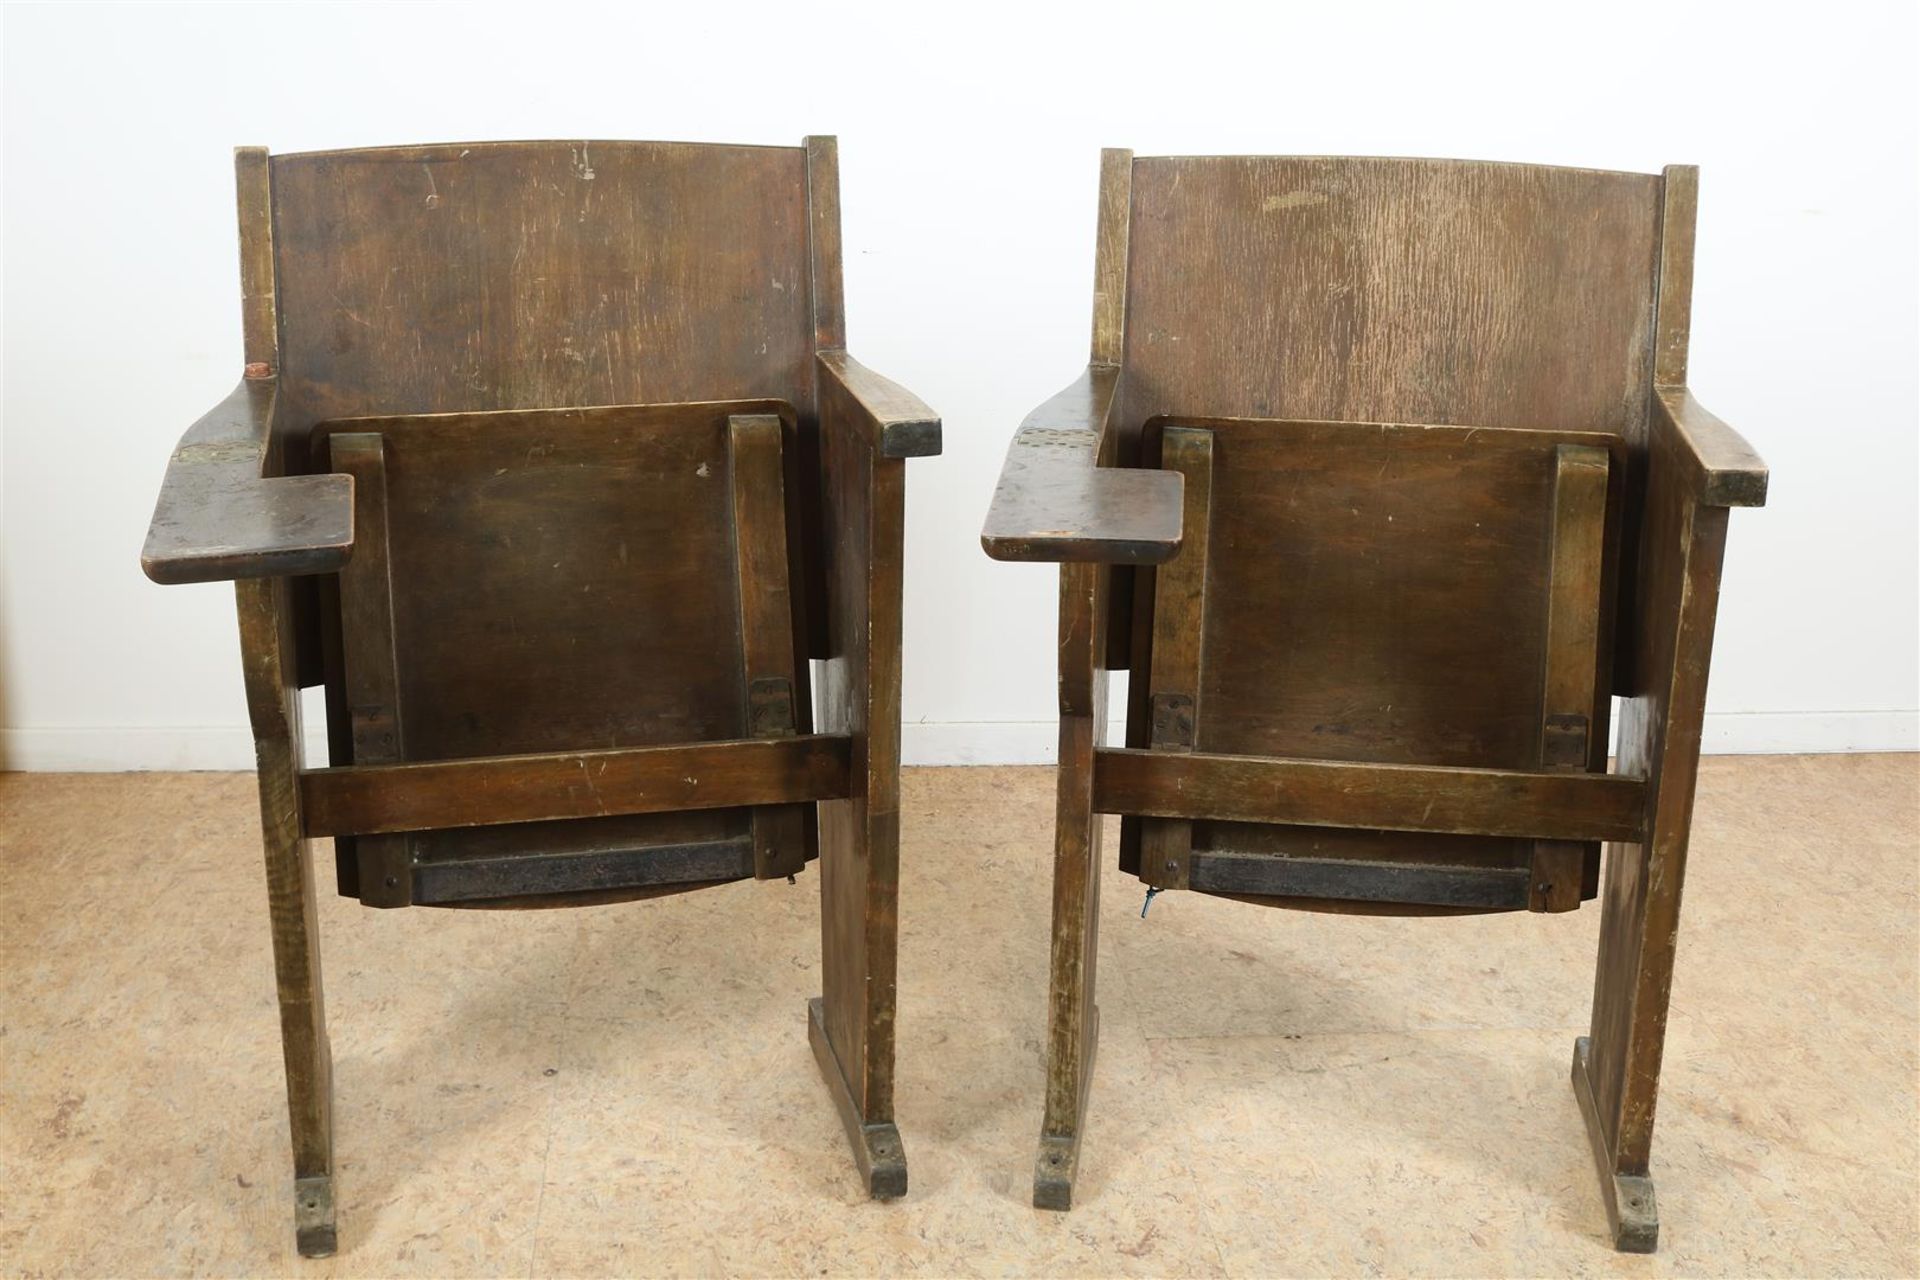 Two wooden folding chairs with folding armrests, probably from a lecture hall - Image 2 of 4